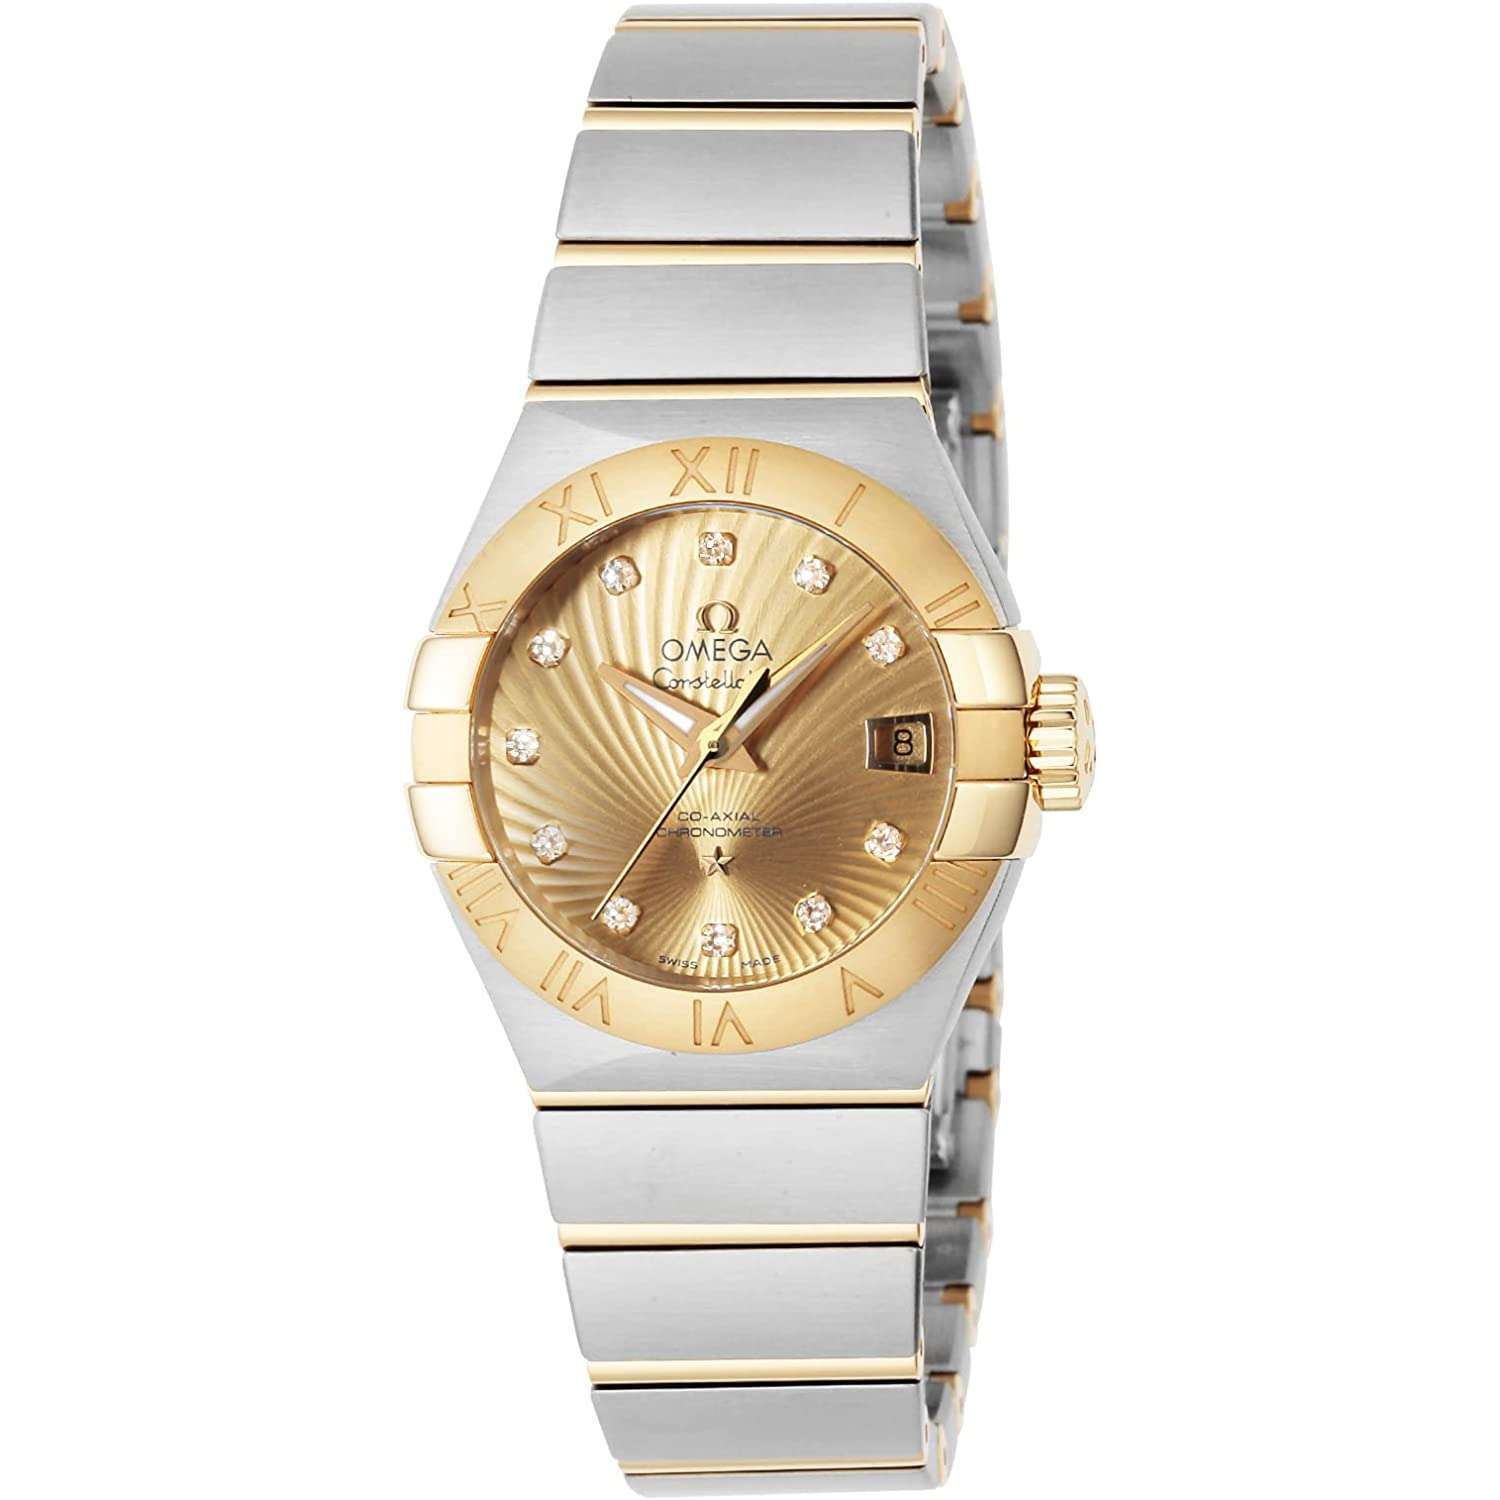 OMEGA CONSTELLATION CO-AXIAL CHRONOMETER 26.5 MM WOMEN WATCH 123.20.27.20.58.001 - ROOK JAPAN